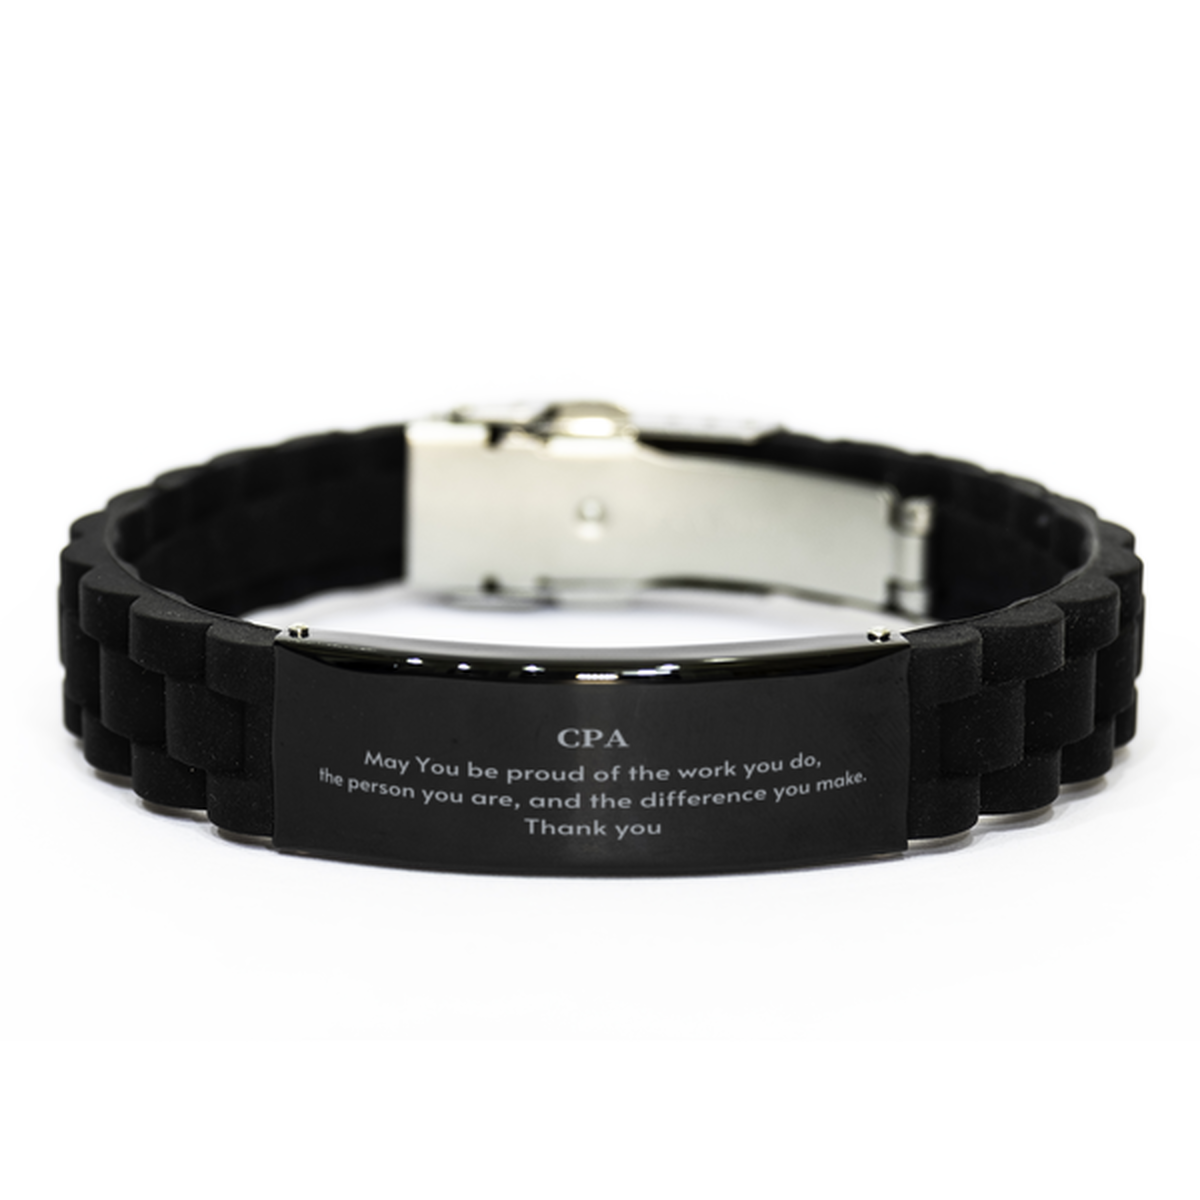 Heartwarming Black Glidelock Clasp Bracelet Retirement Coworkers Gifts for CPA, CPA May You be proud of the work you do, the person you are Gifts for Boss Men Women Friends